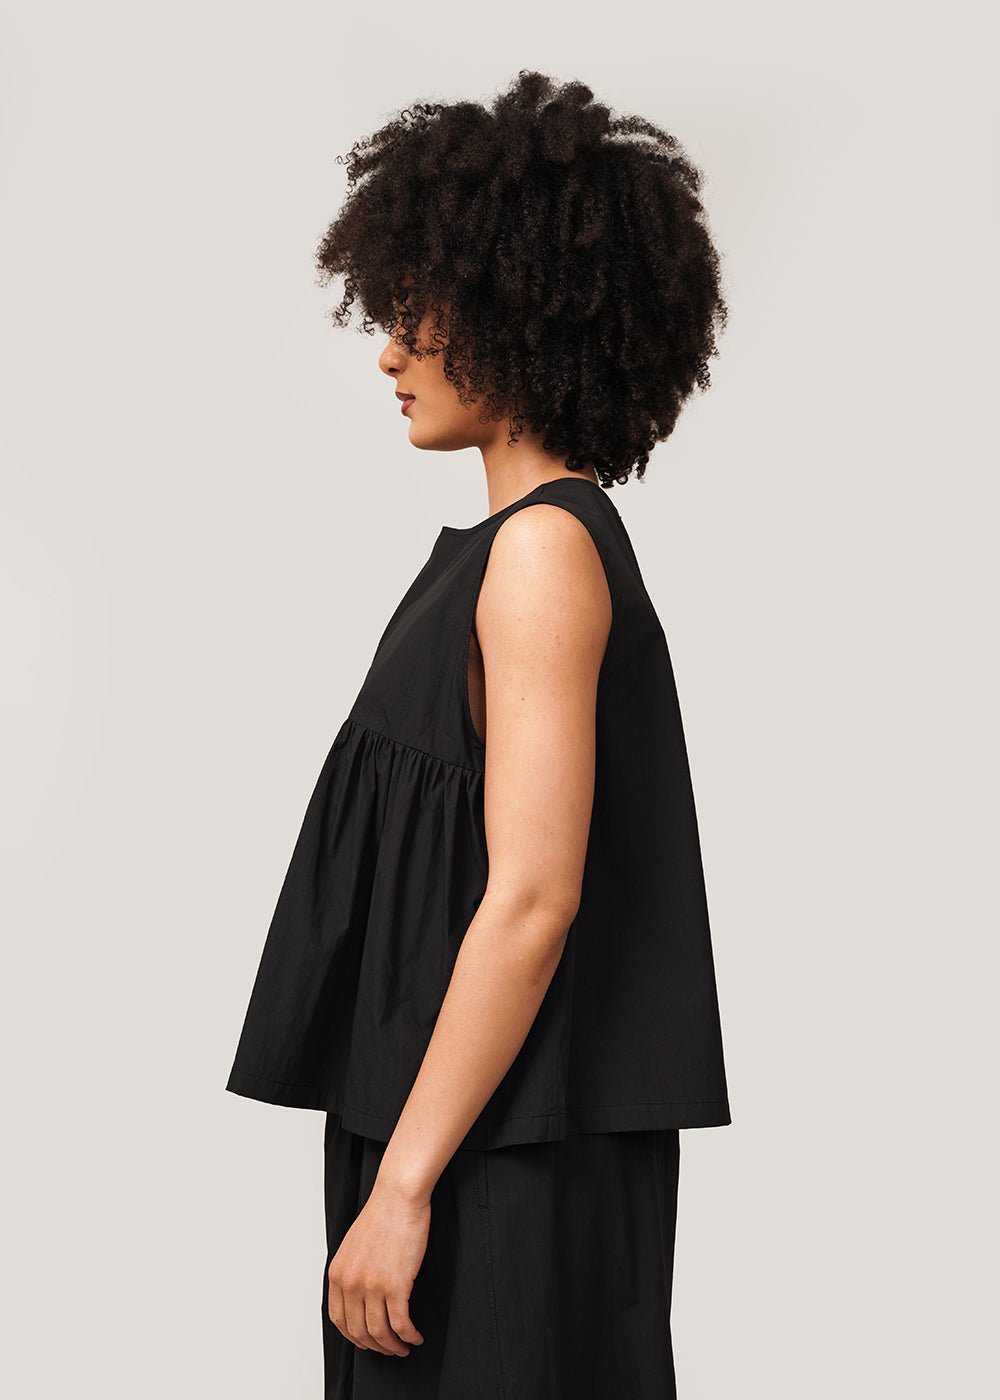 AMOMENTO Black Cotton Two-Way Shirring Top - New Classics Studios Sustainable Ethical Fashion Canada